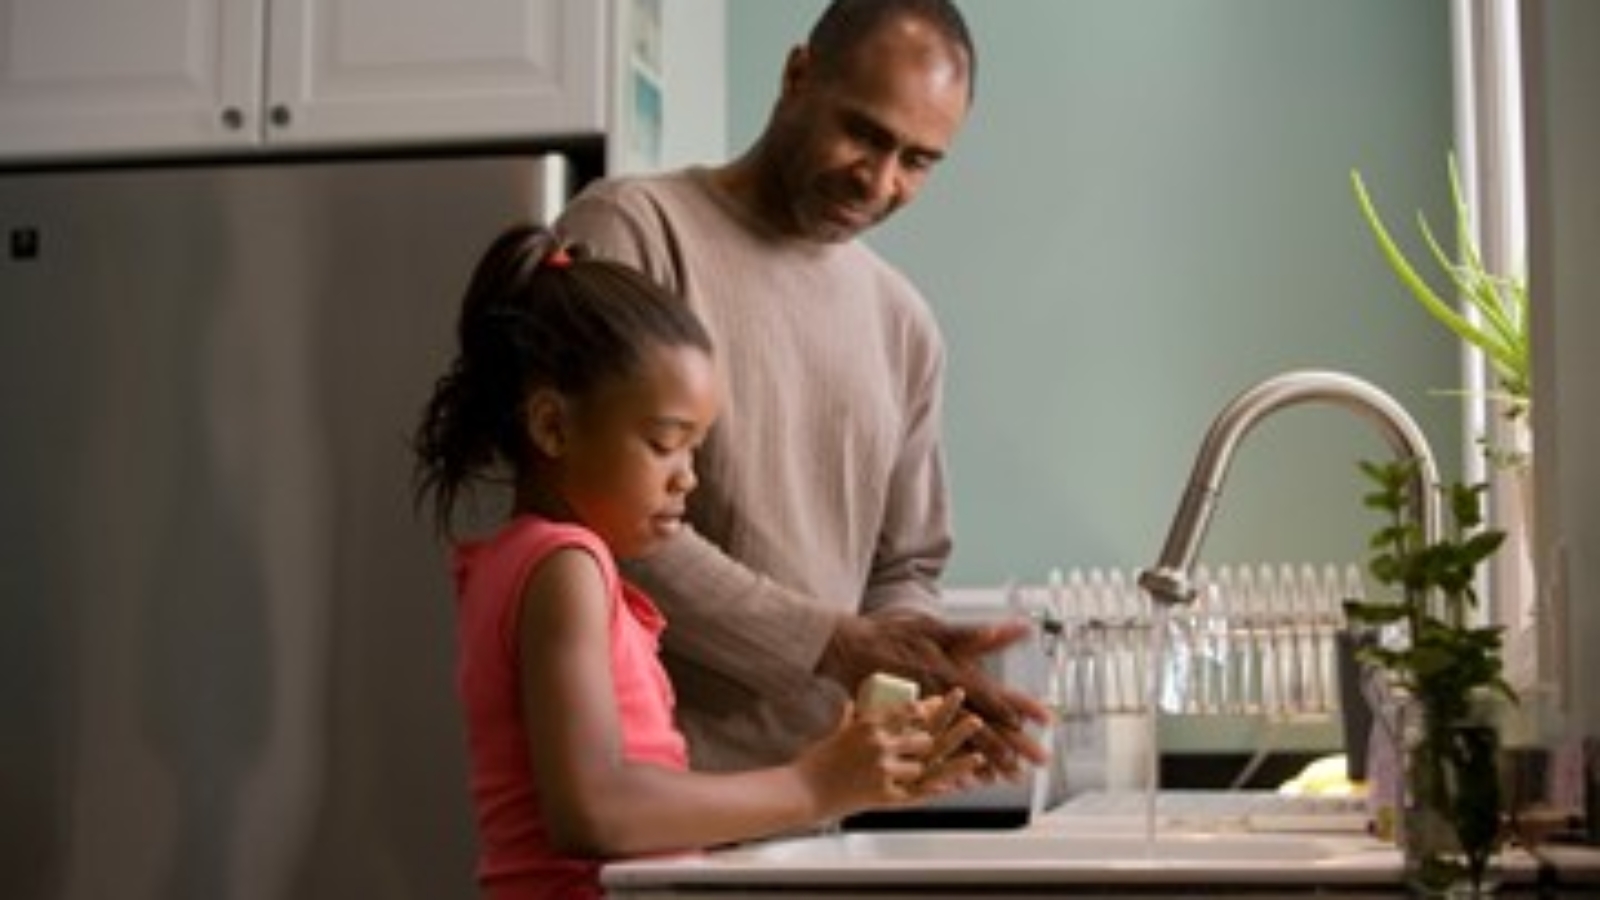 A father and daughter washing dishes together.